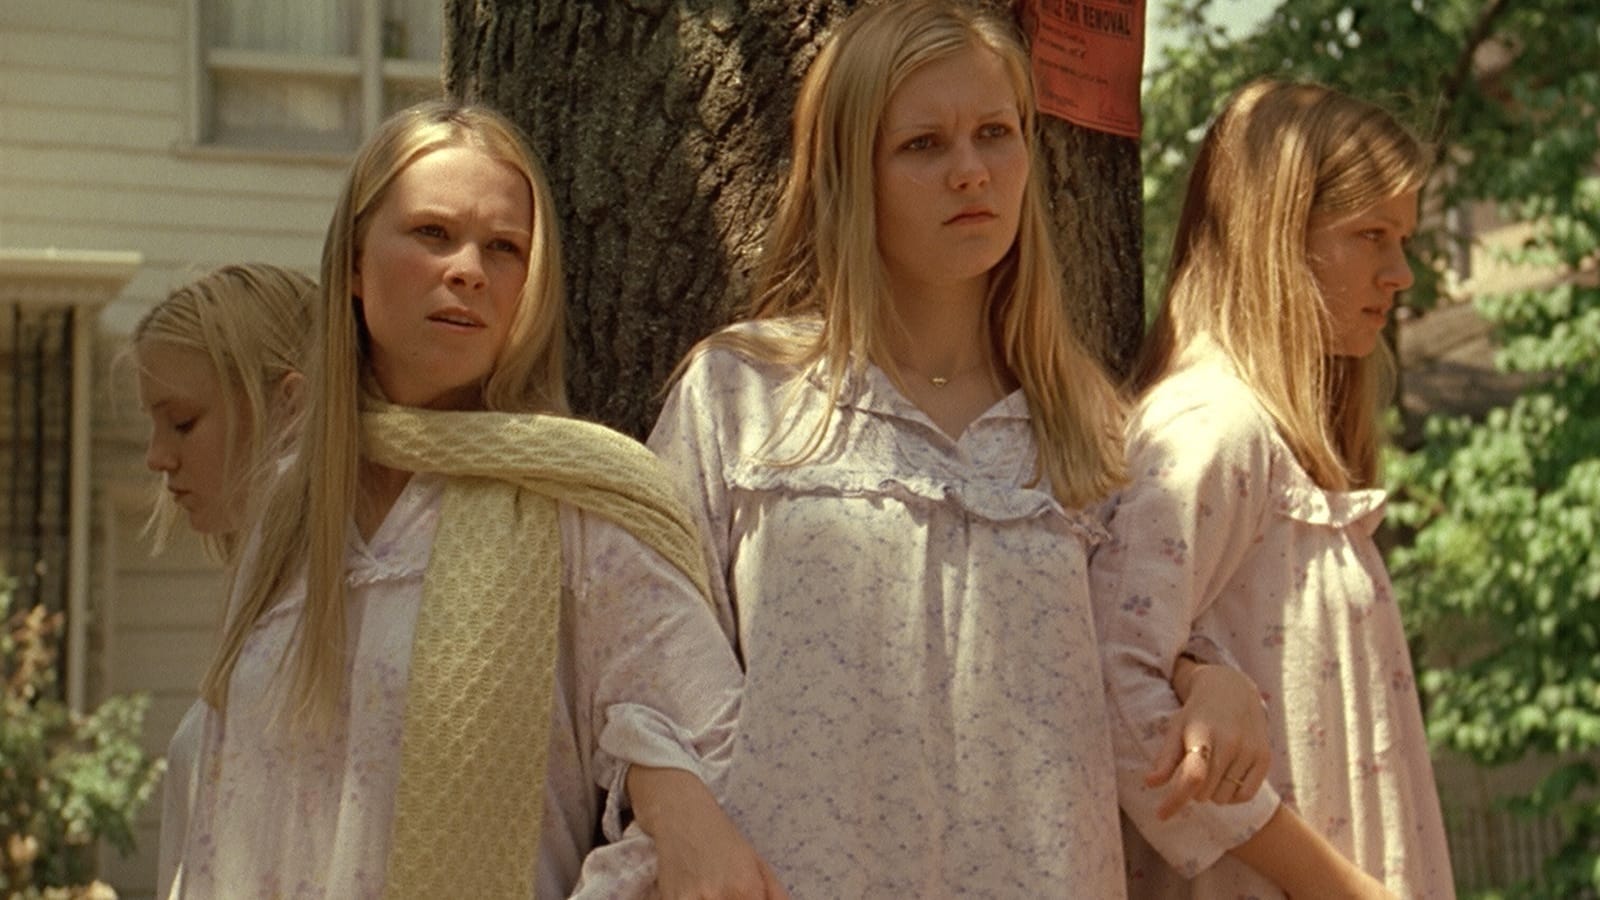 Watch The Virgin Suicides (1999) Full Movie - Download HD Quality The Virgi...